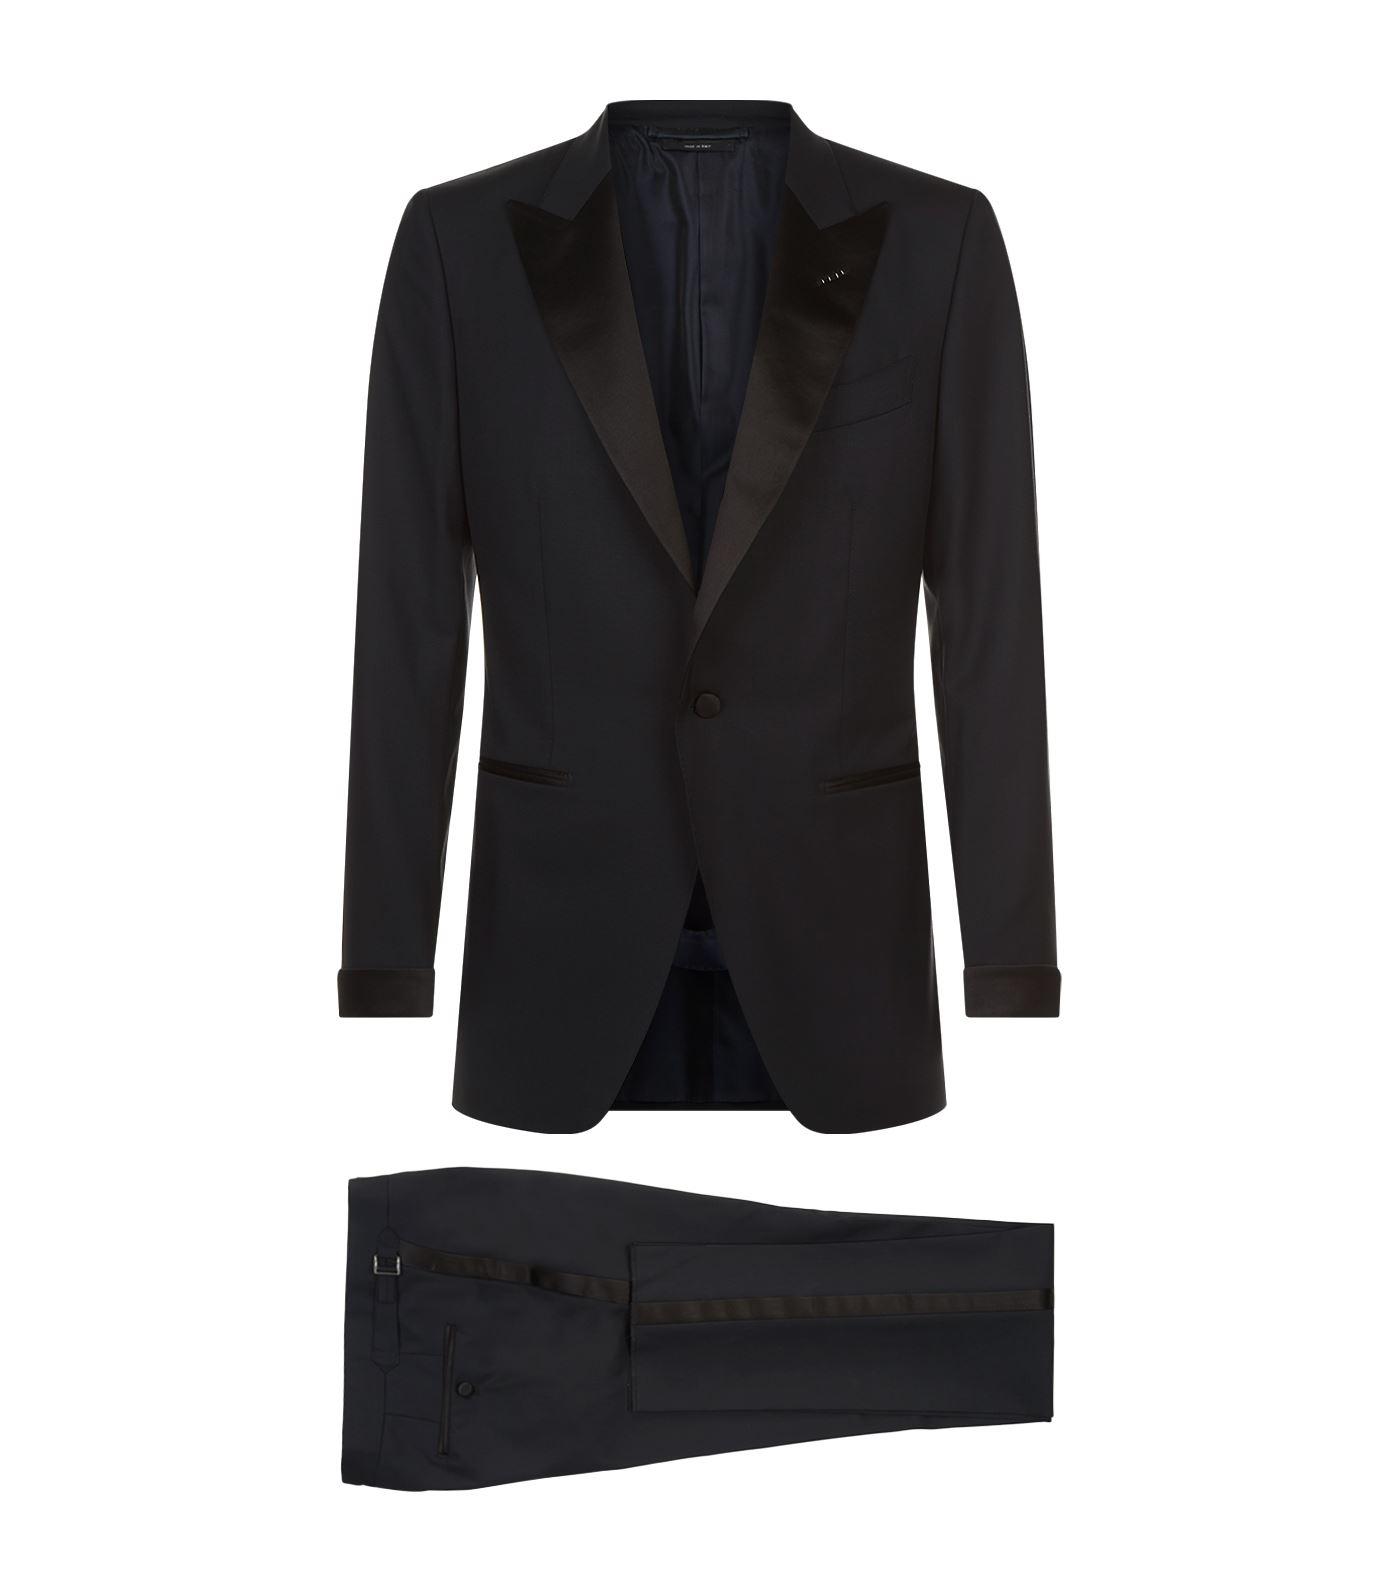 Tom Ford Wool O'connor Suit in Navy (Blue) for Men - Lyst